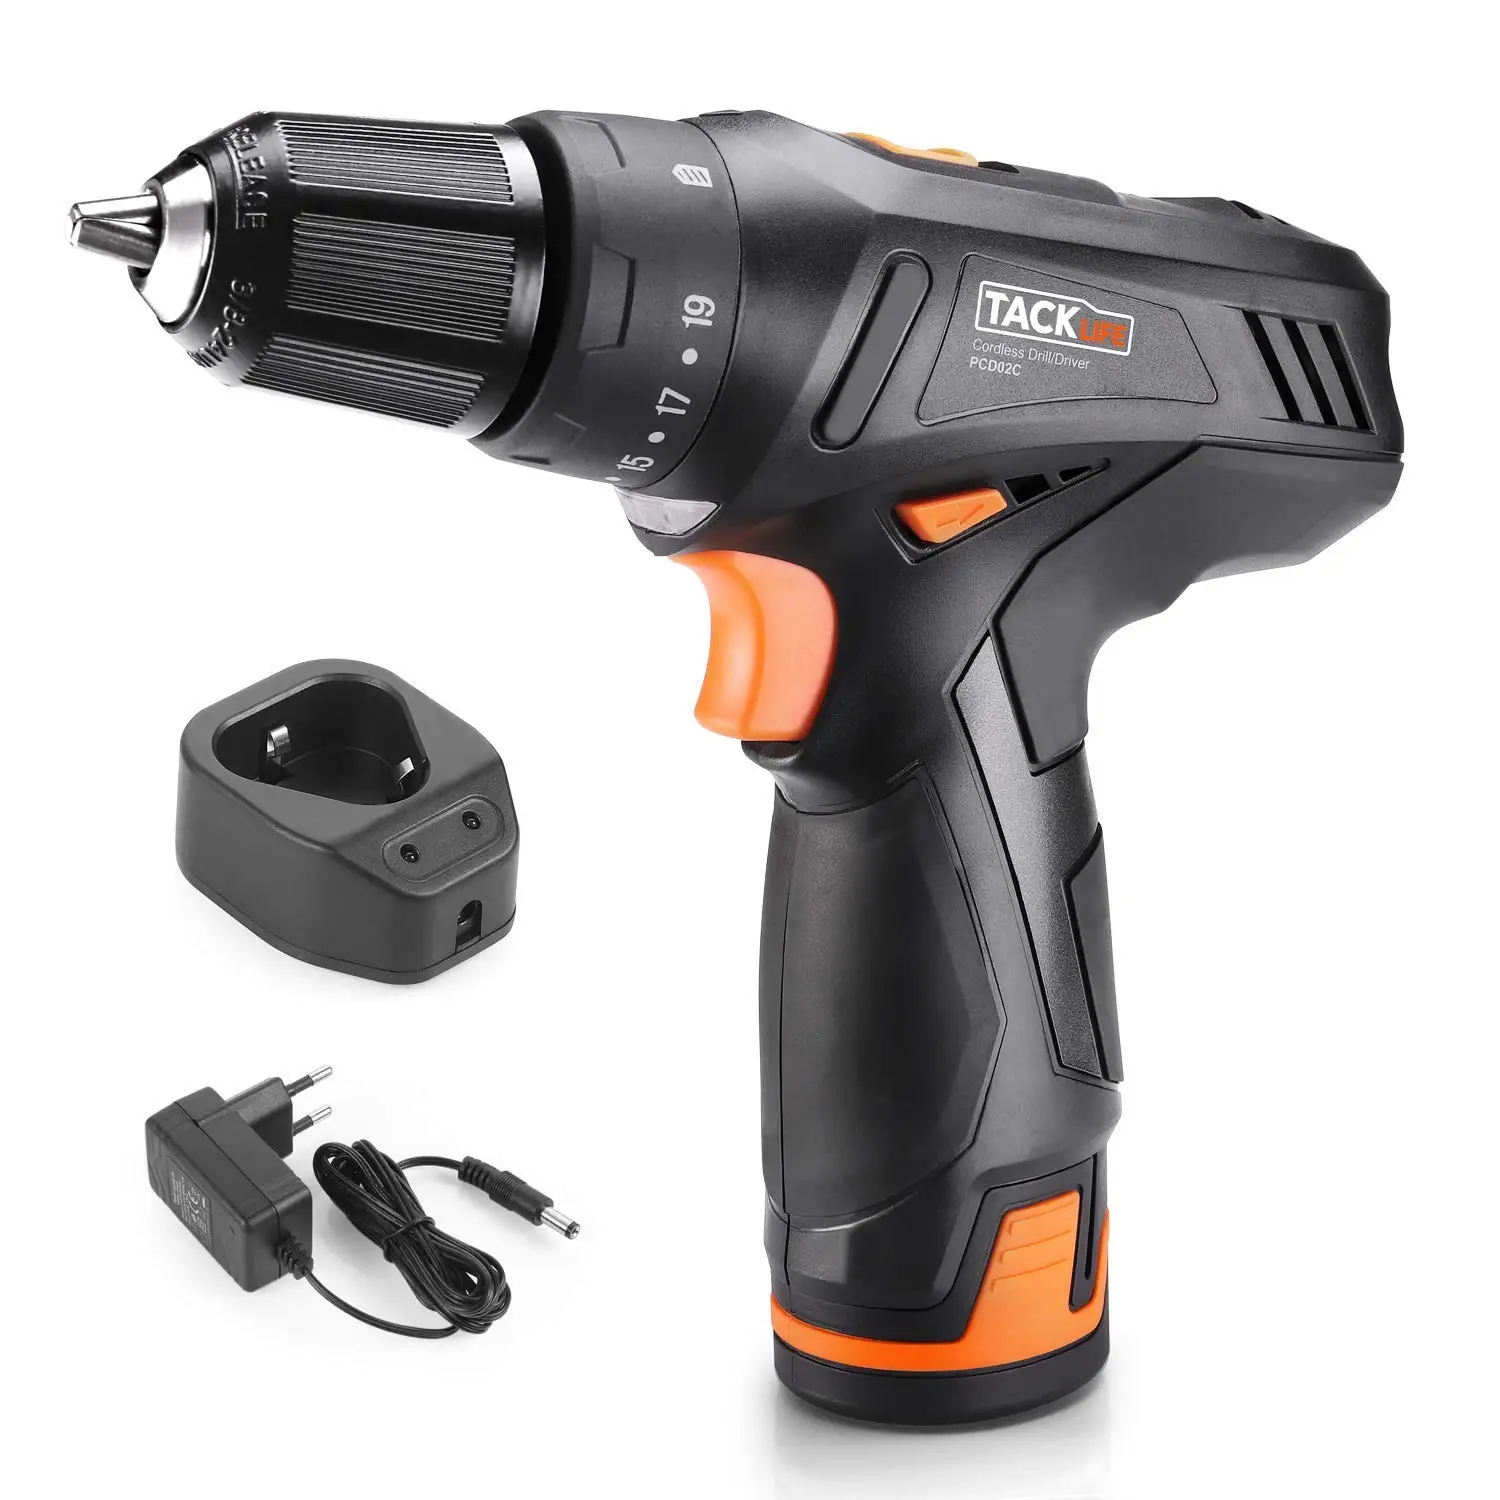 PROSTORMER 20V Max 2.0Ah Lithium Compact Drill with LED Light 1 Hour Fast Charger 2-Speed Max Torque 310 In-lbs 30pcs Accessories and Carrying Case Included 3//8 Cordless Drill Driver Set